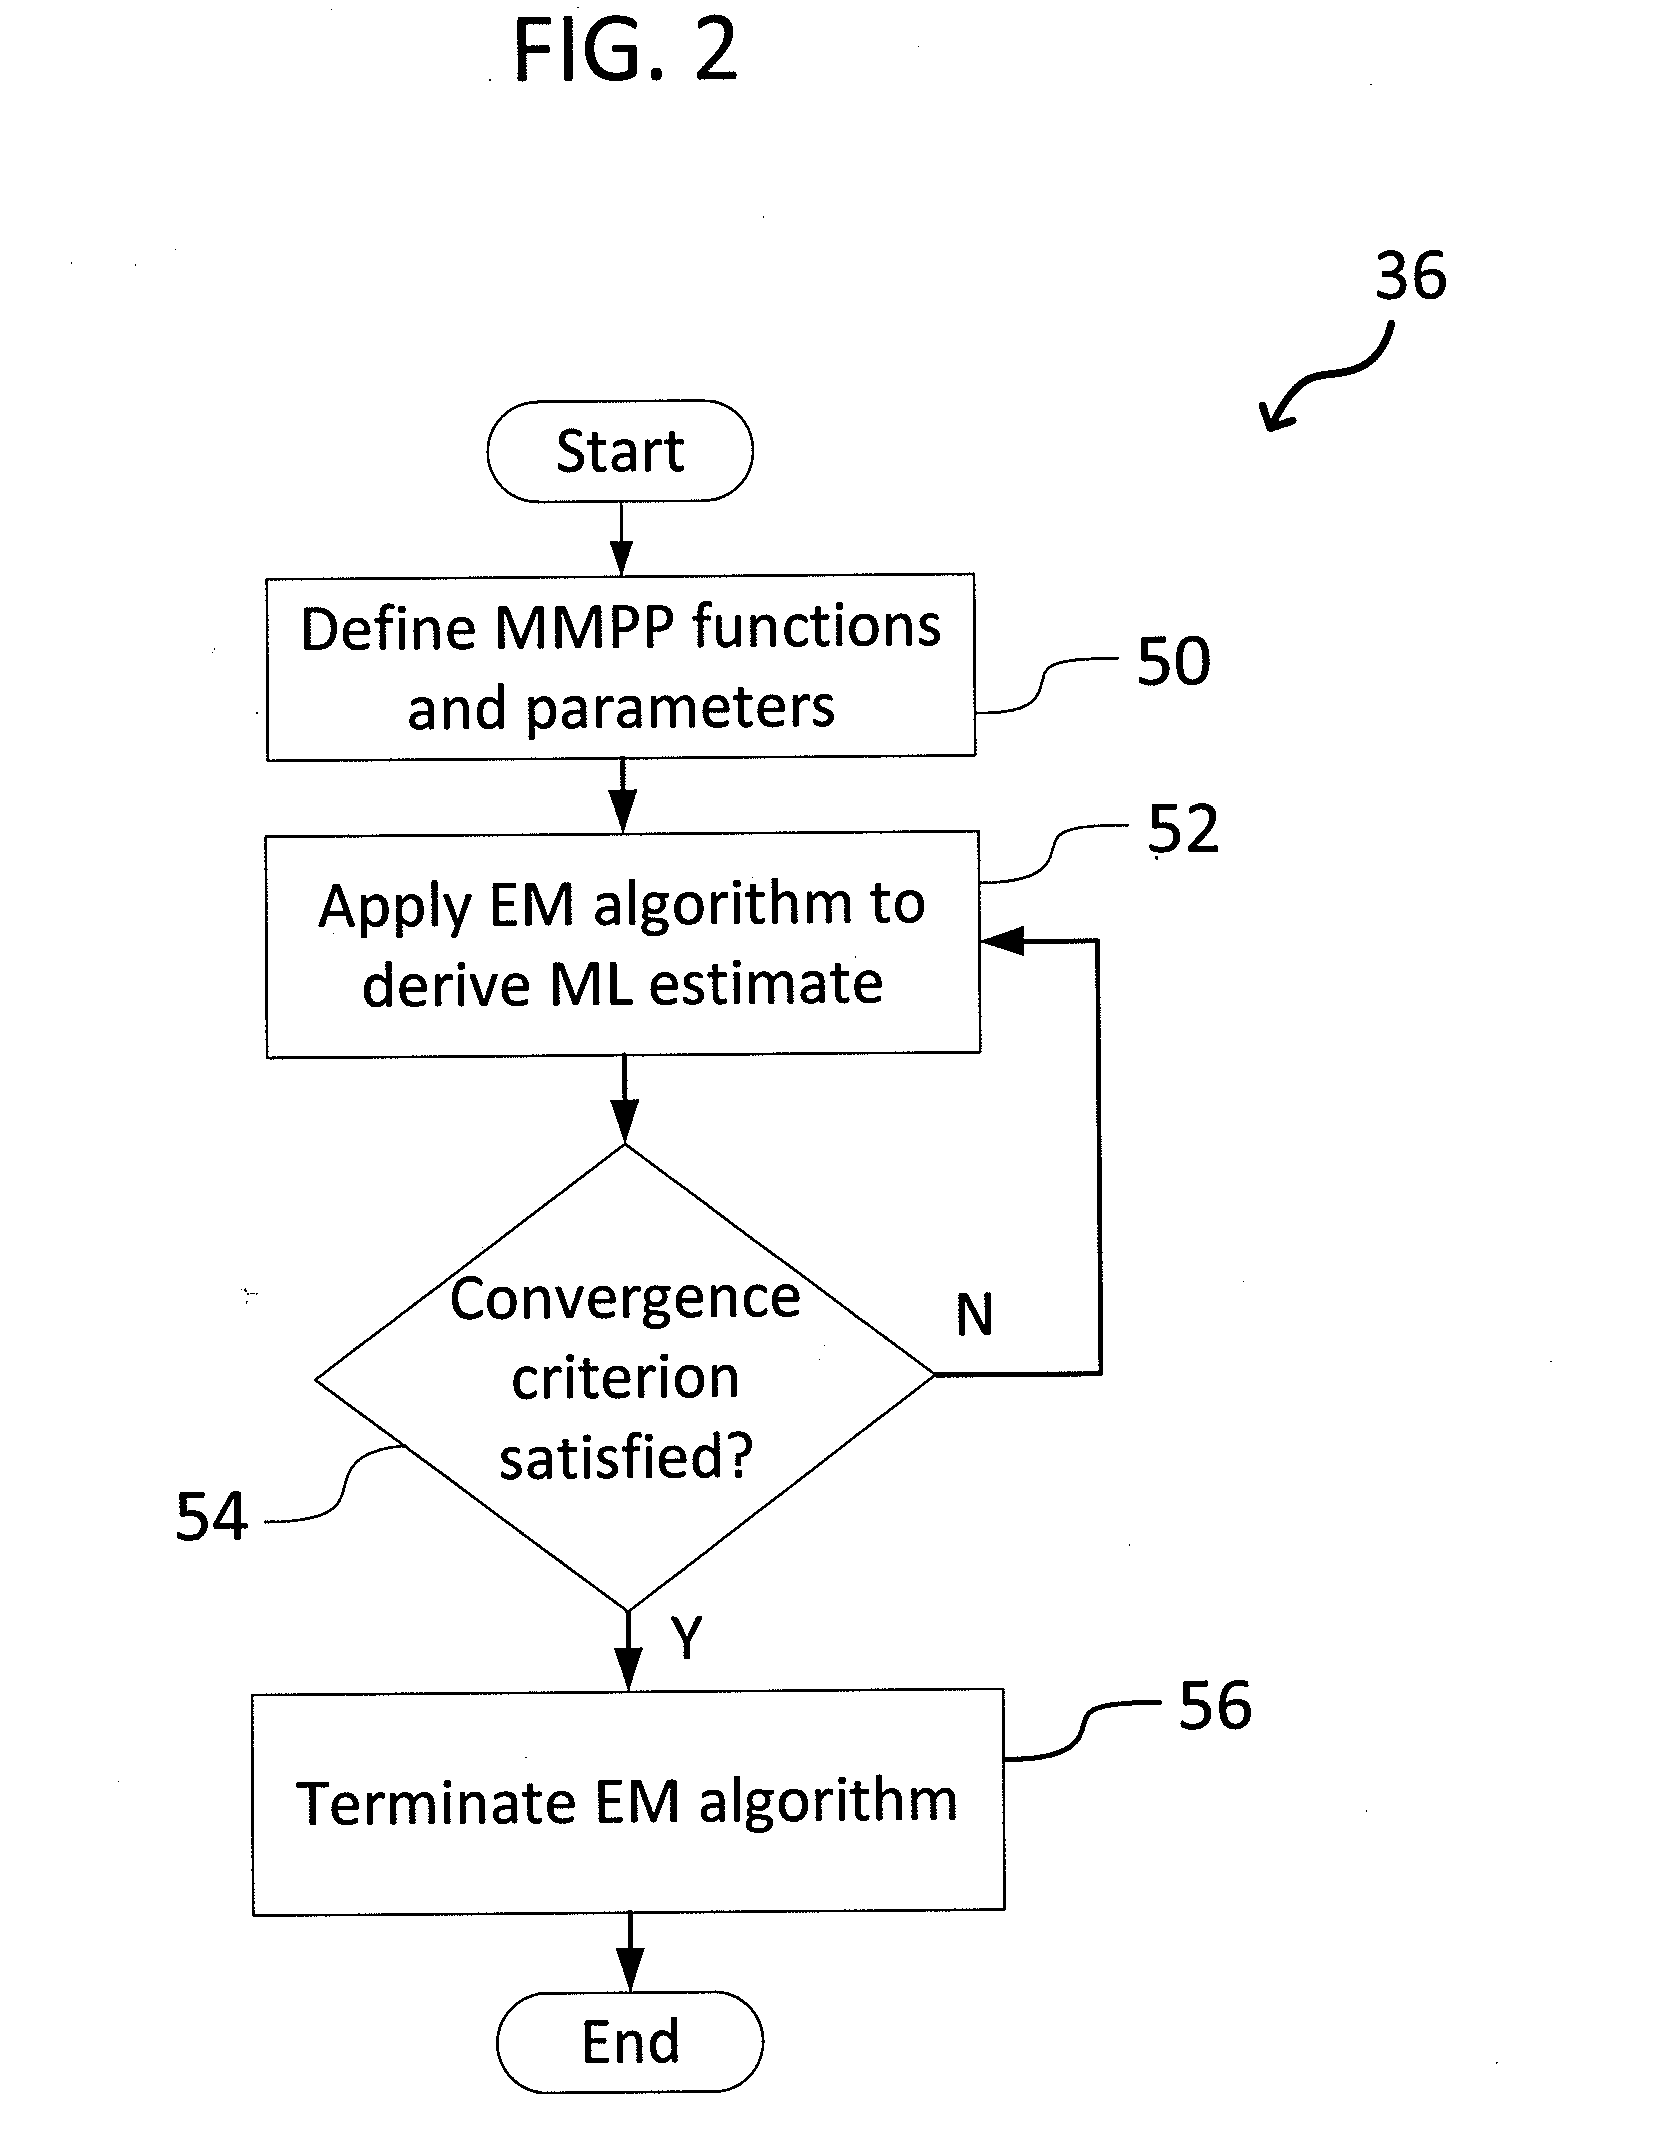 System and Method for Detecting Network Intrusions Using Statistical Models and a Generalized Likelihood Ratio Test